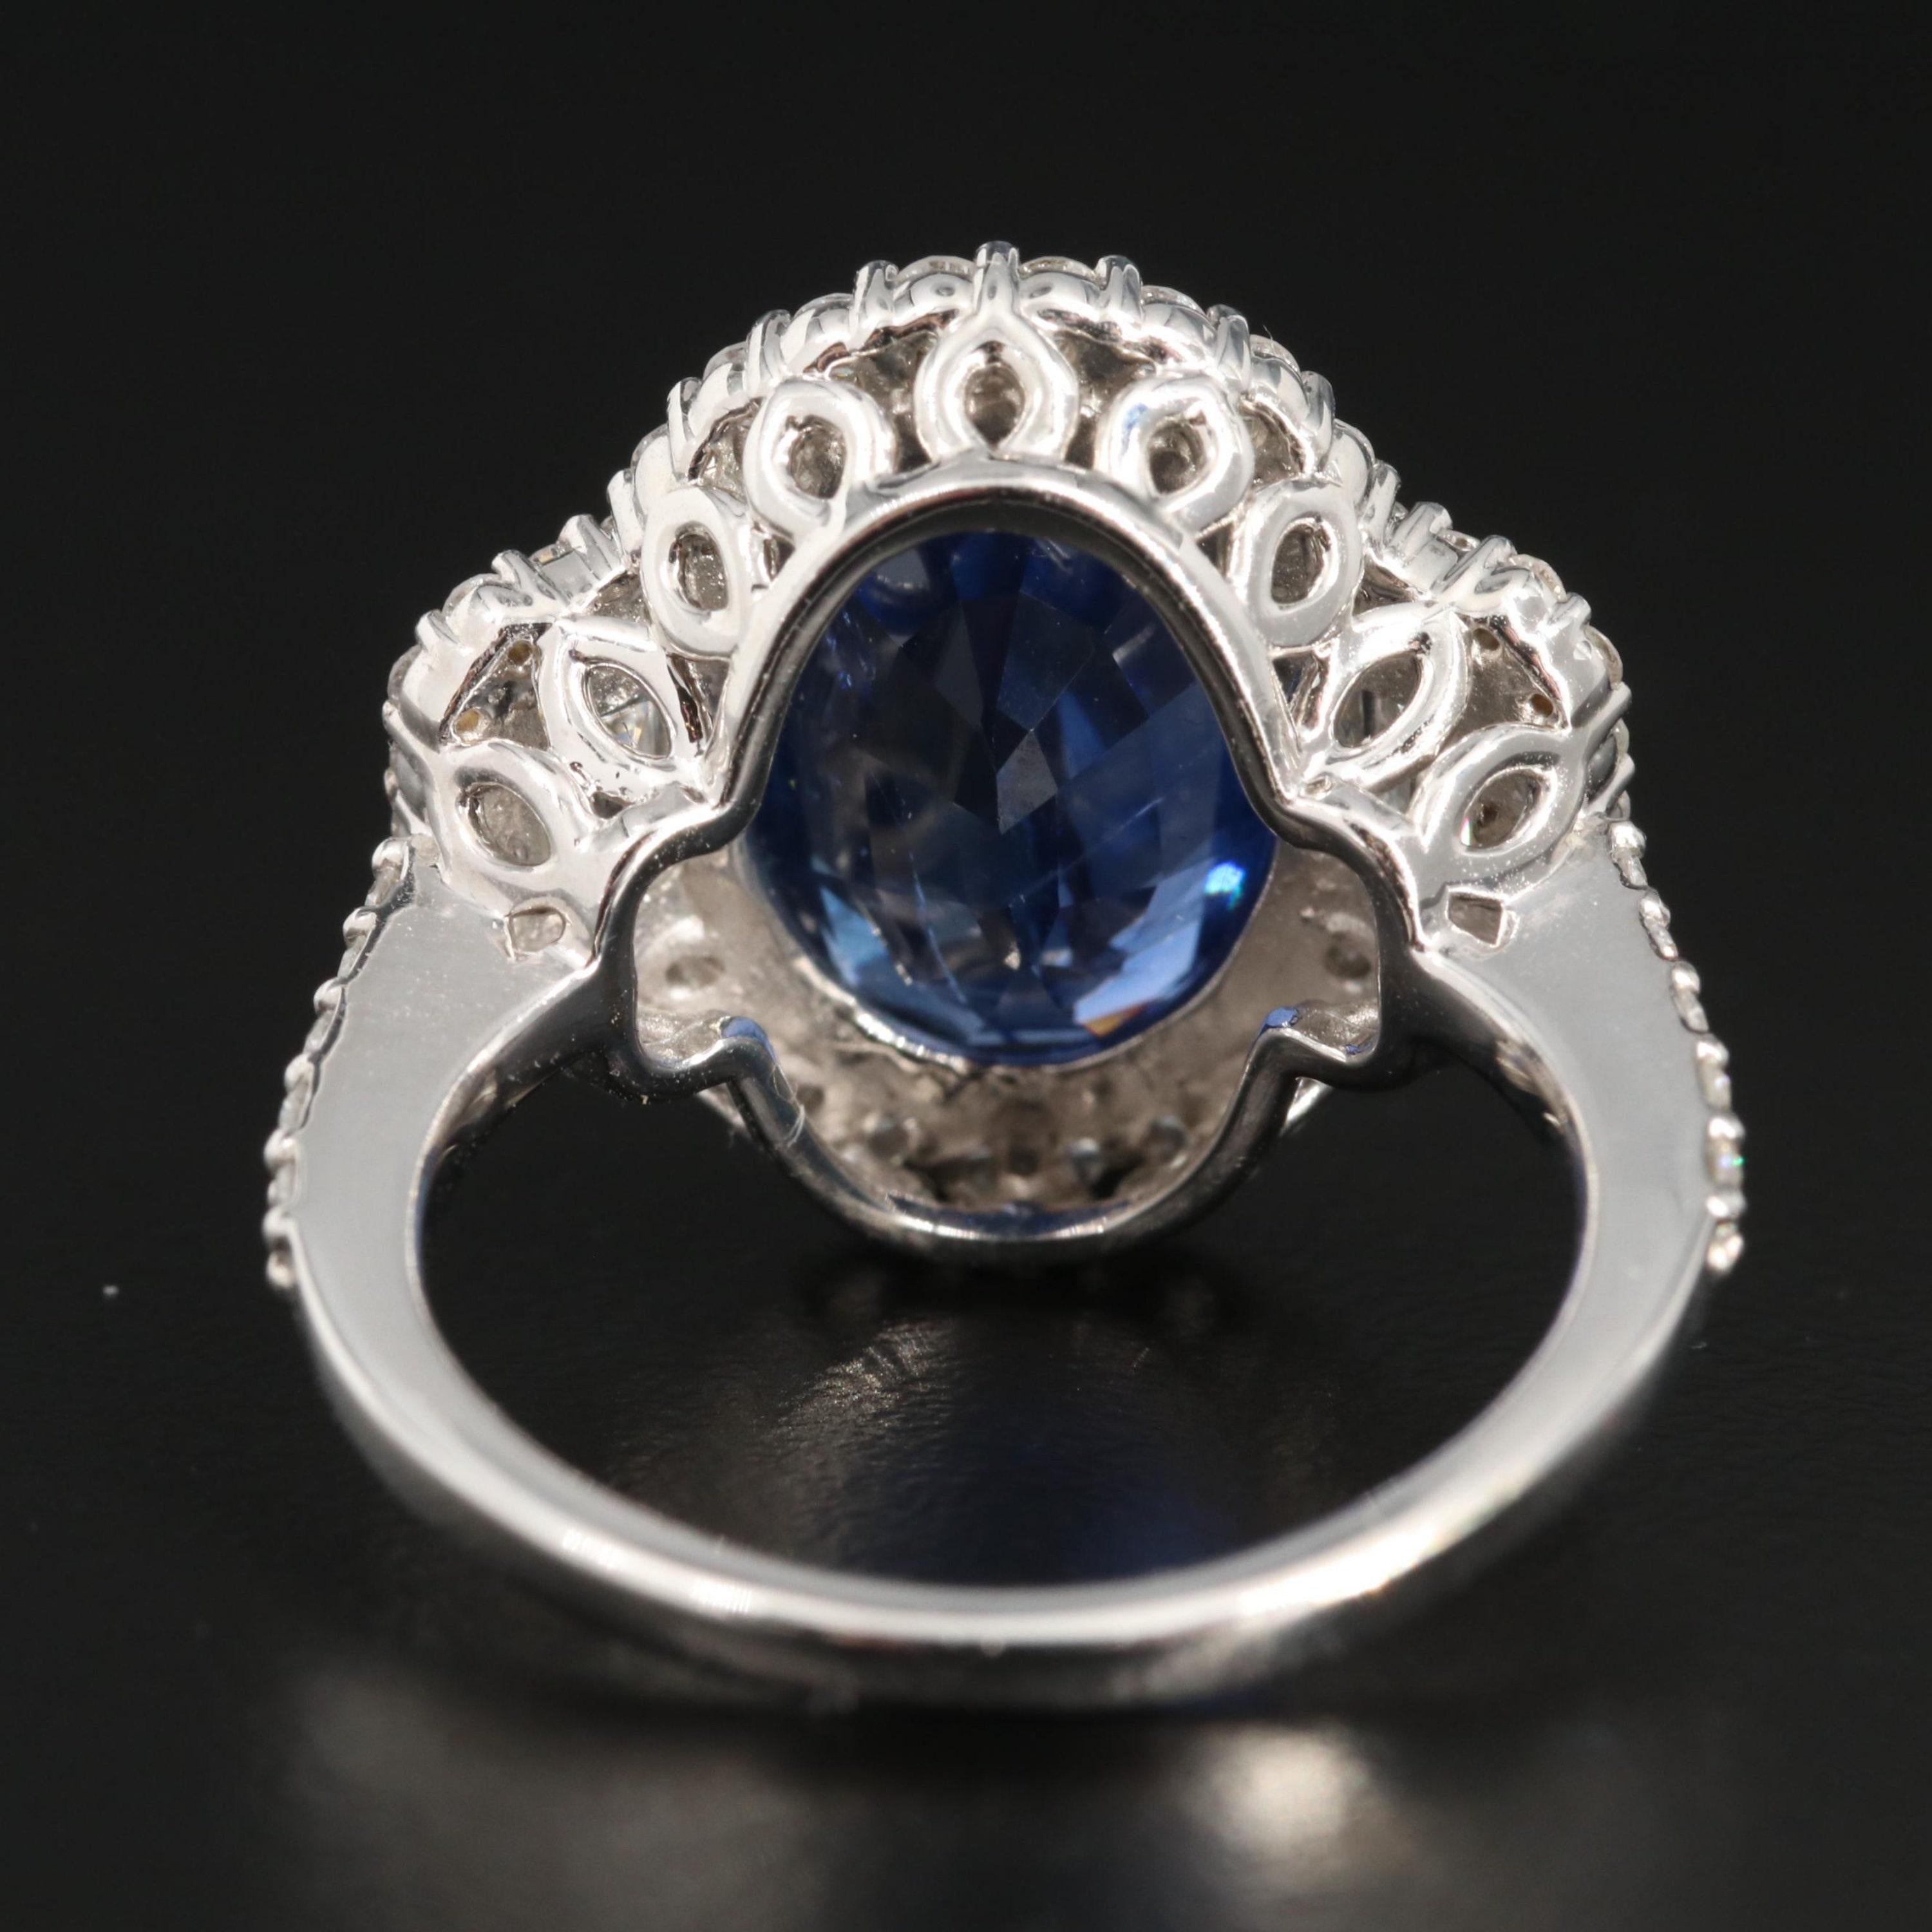 For Sale:  5 Carat Natural Sapphire Diamond Engagement Ring Set in 18K Gold, Cocktail Ring 5